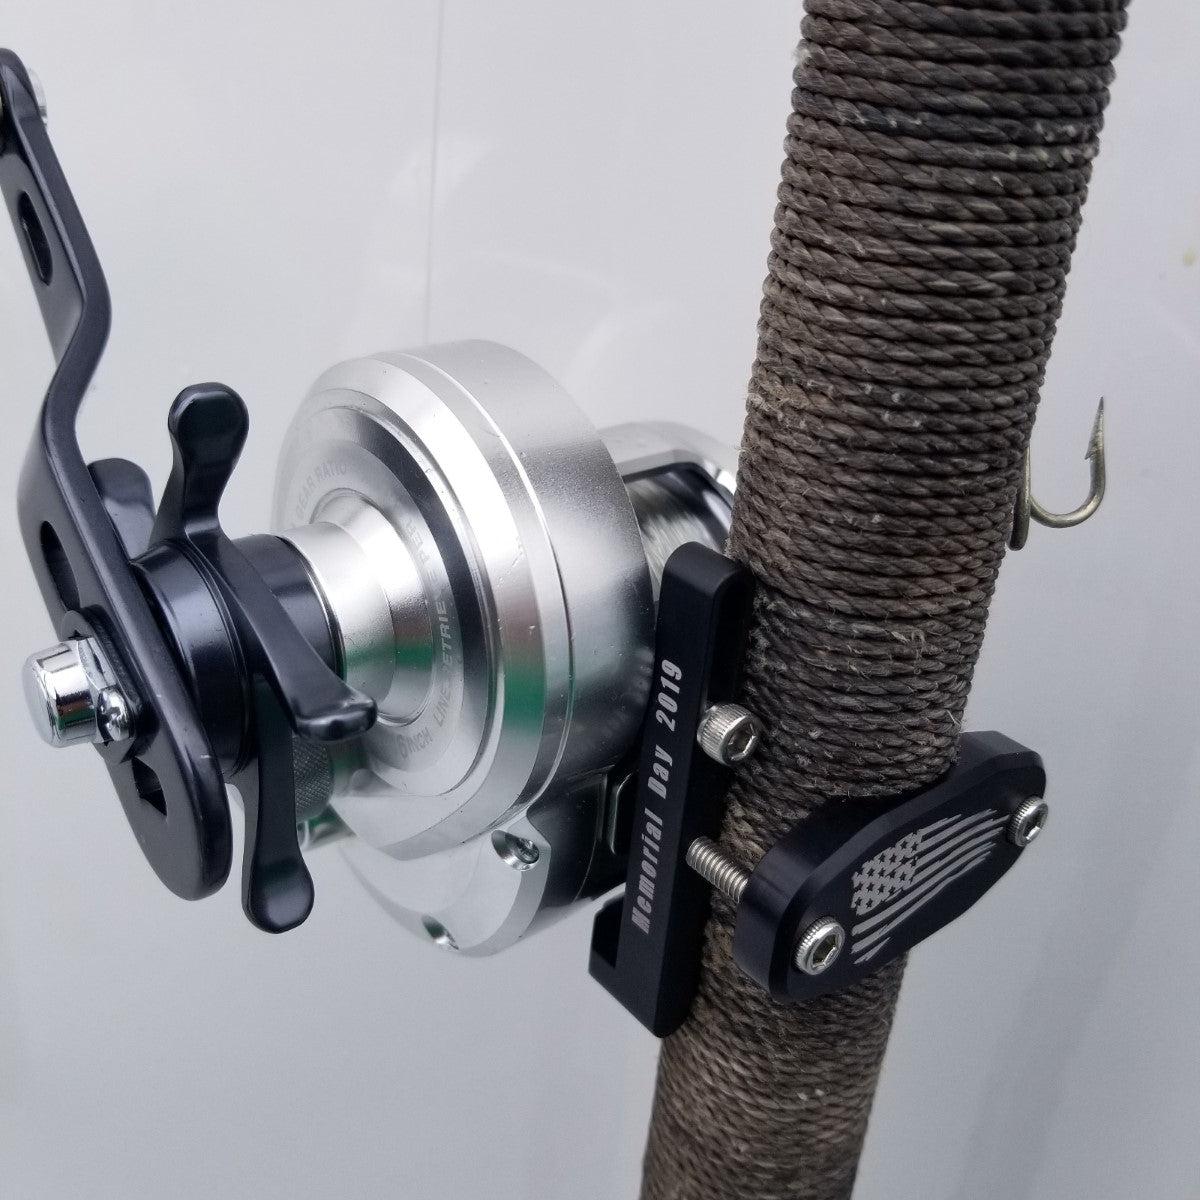 DFP Mega Clamp – Duran's Fishing Products